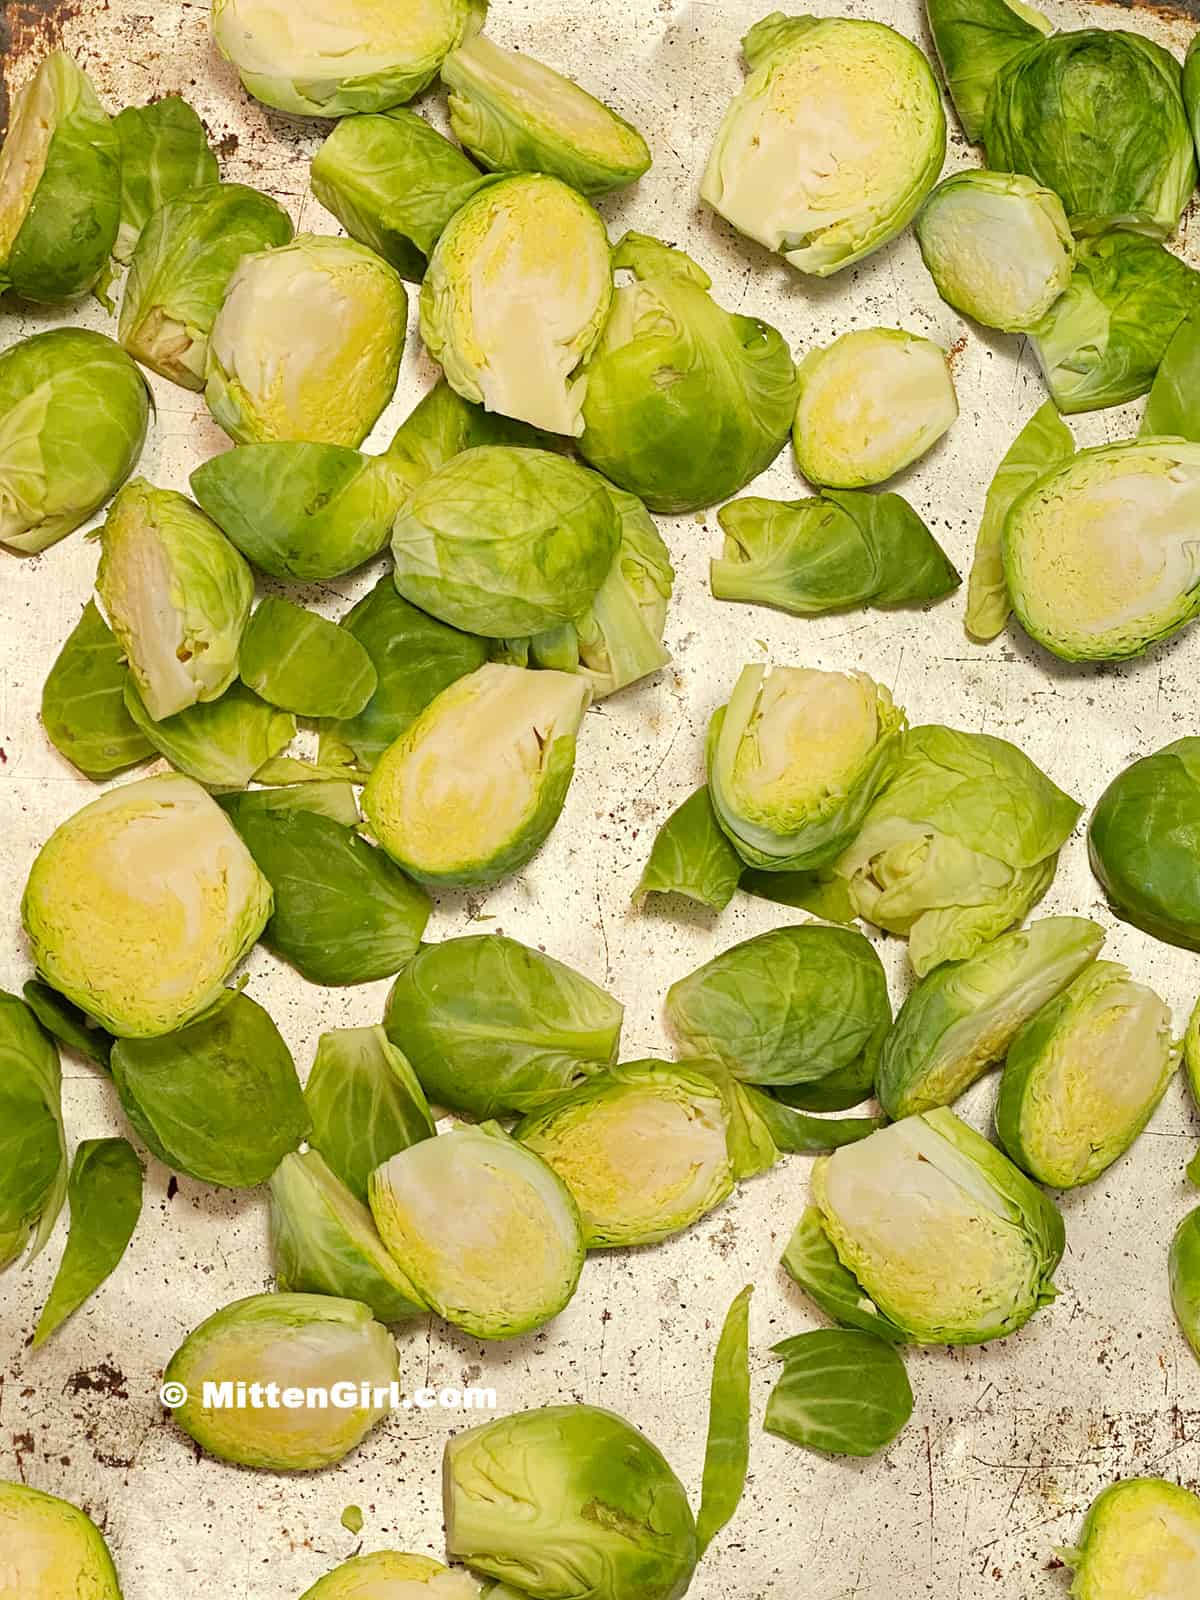 A pan full of brussels sprouts.